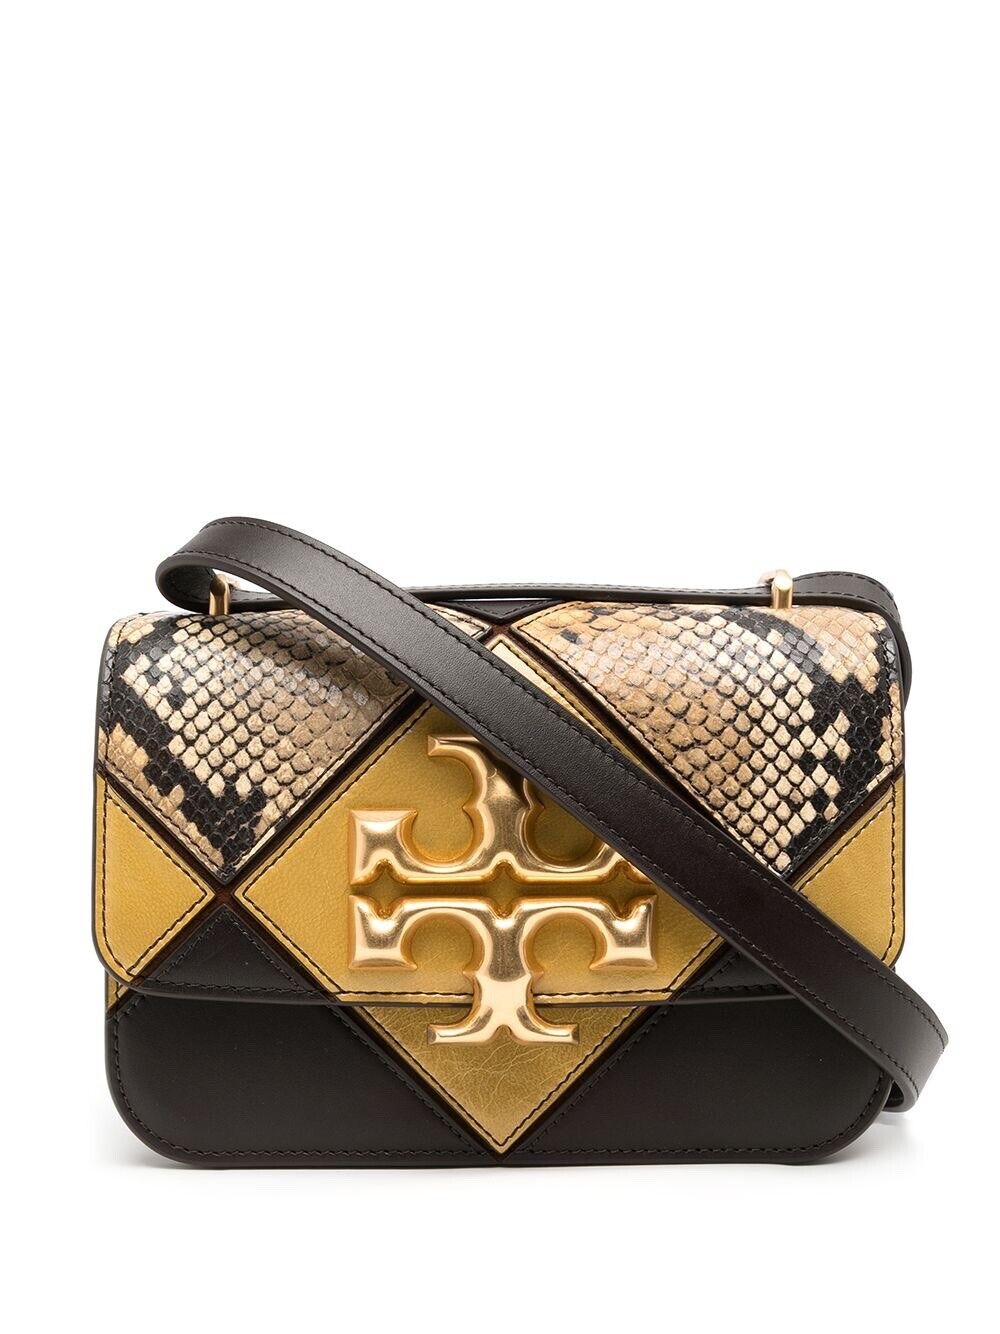 Tory Burch Eleanor Exotic Diamond Quilted Leather Shoulder Bag | eBay